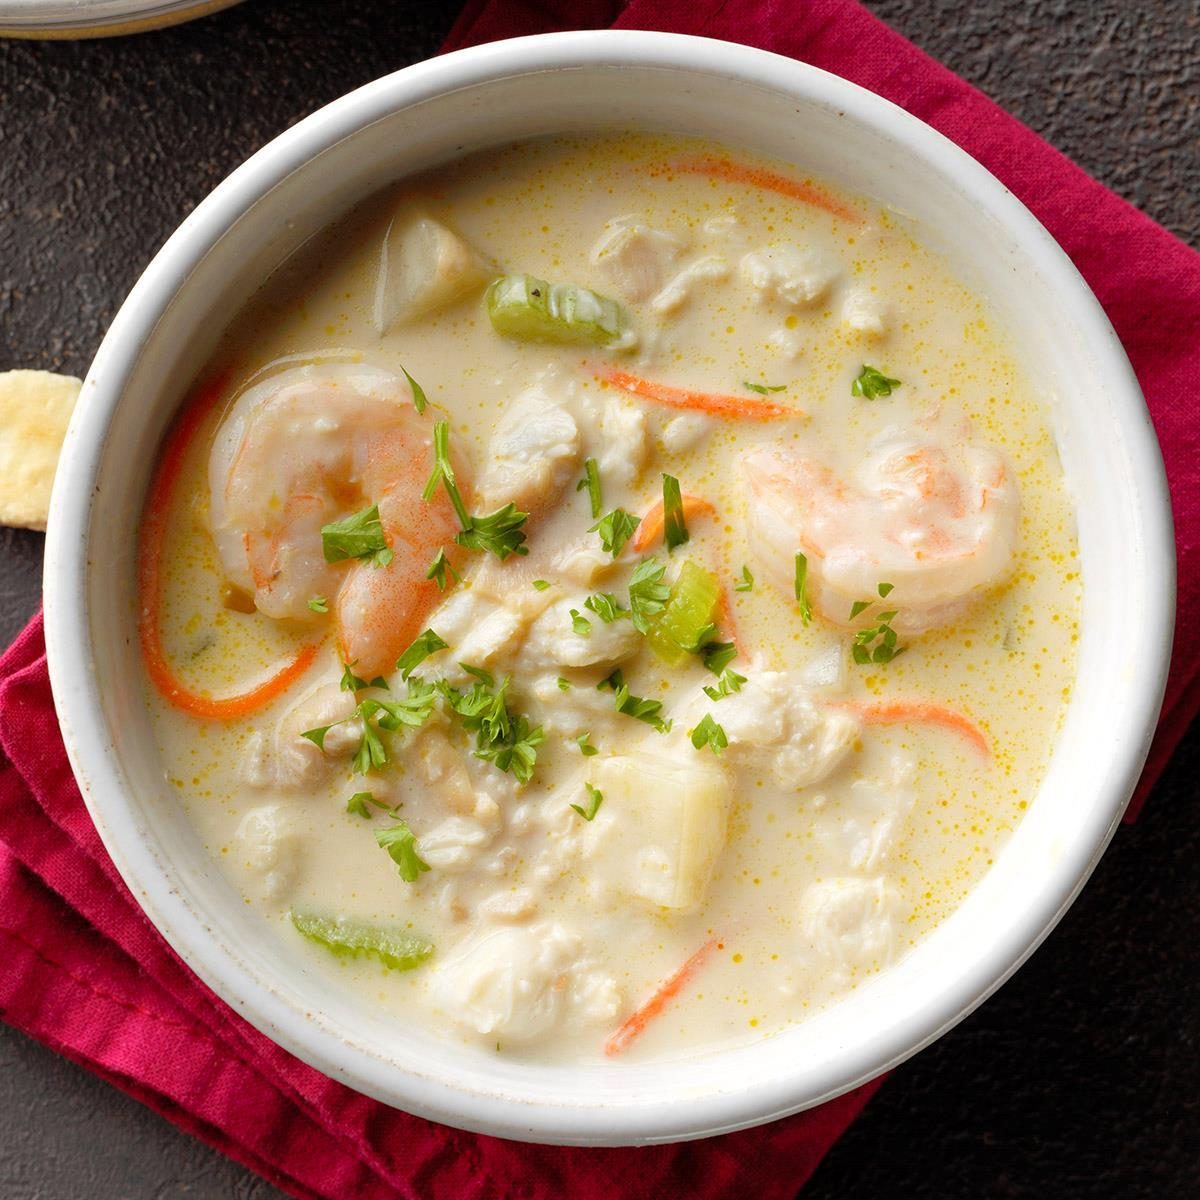 Rich Seafood Chowder Recipe How To Make It